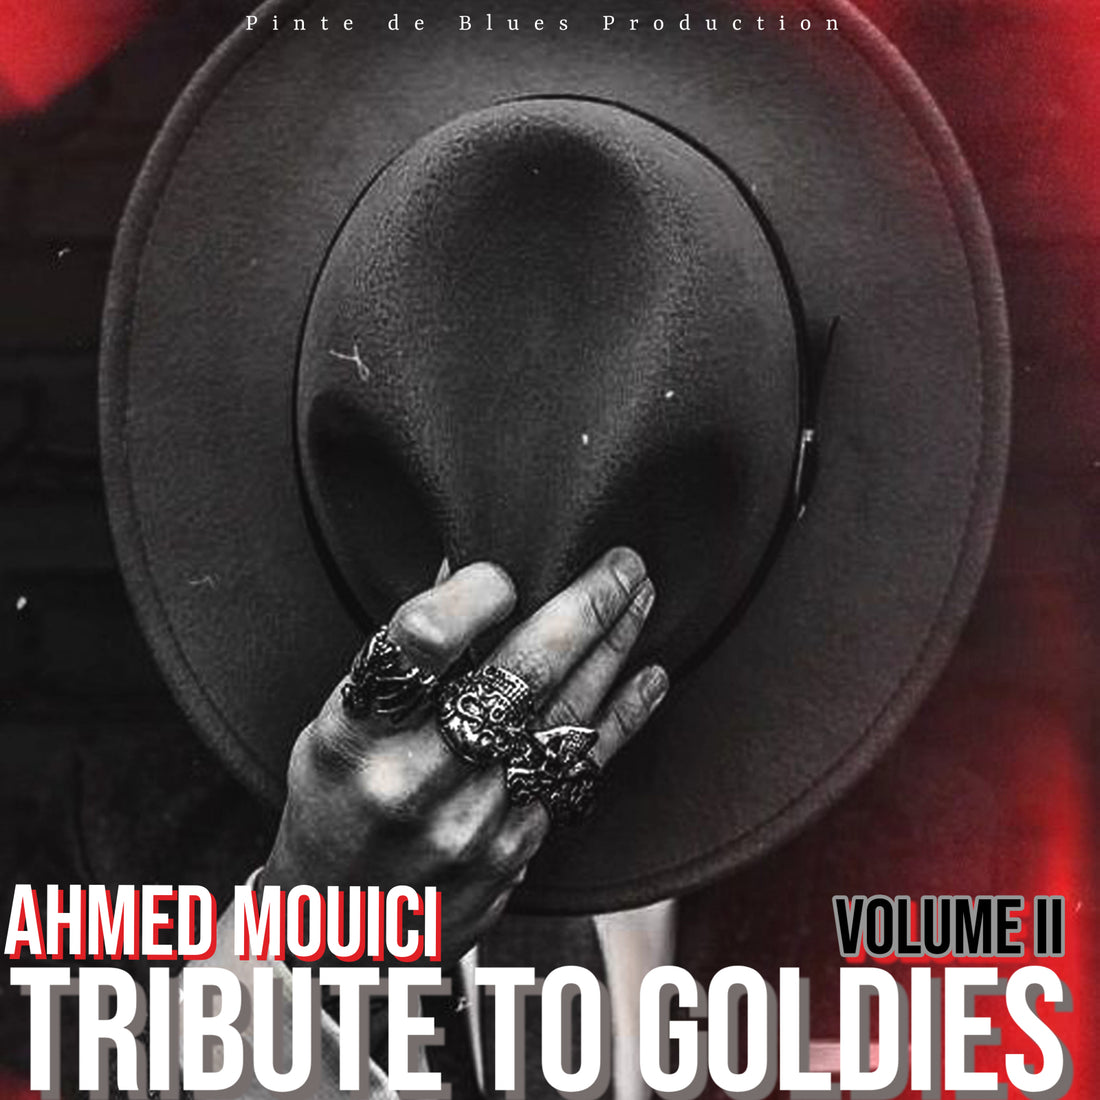 Tribute to Goldies Volume II - Ahmed Mouici (Dedicace Personnalisée)